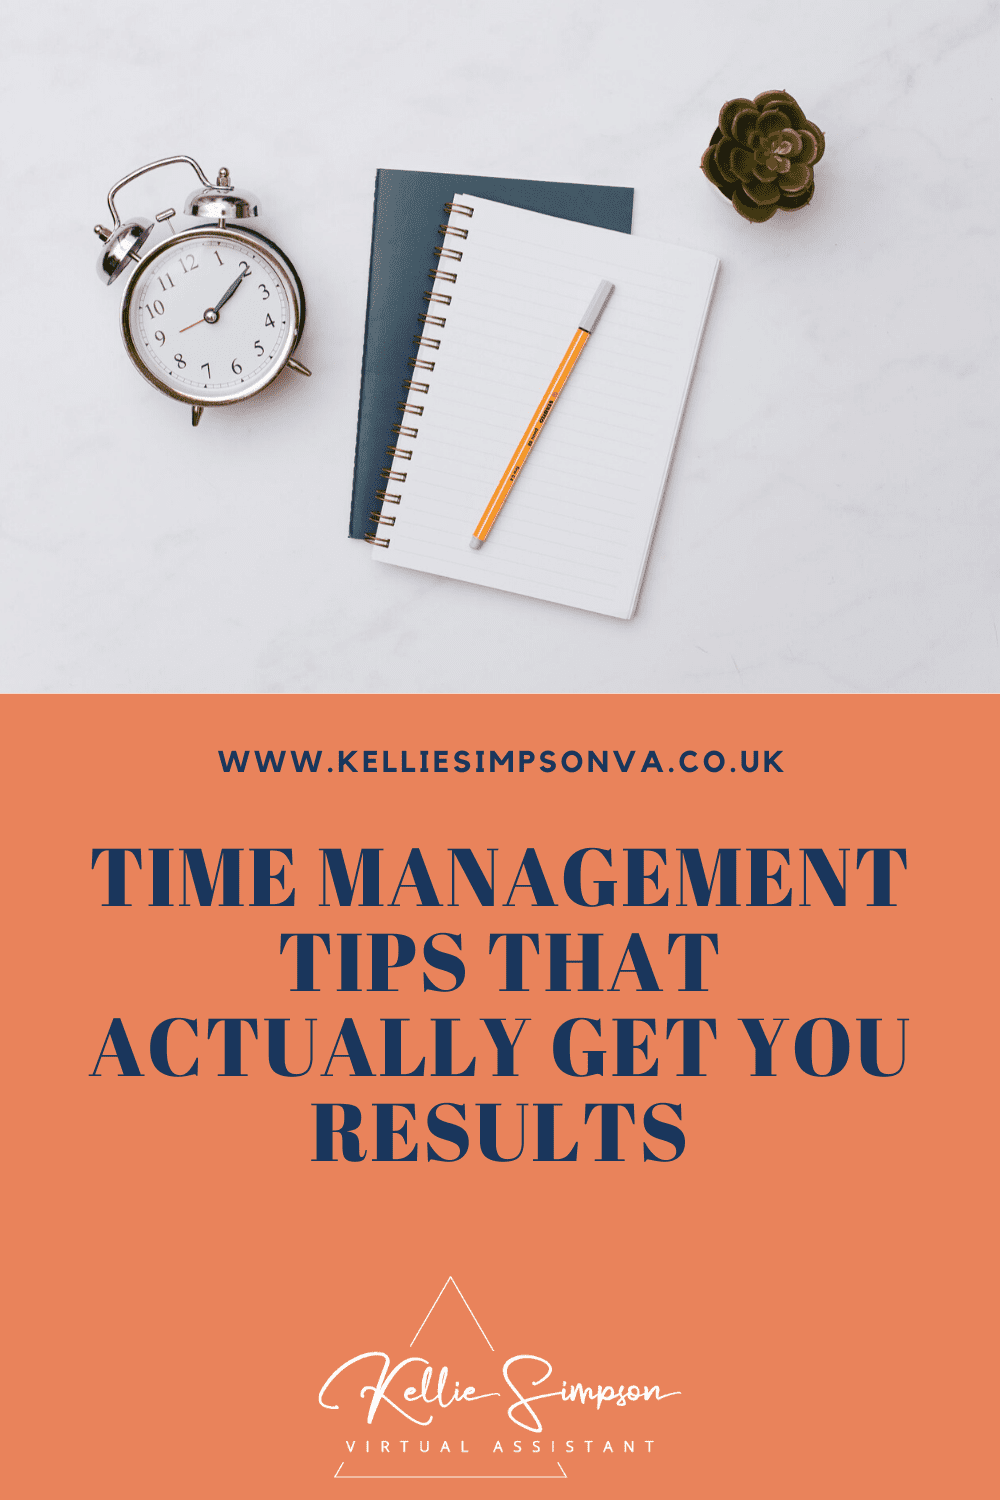 Time Management tips that actually get you results.